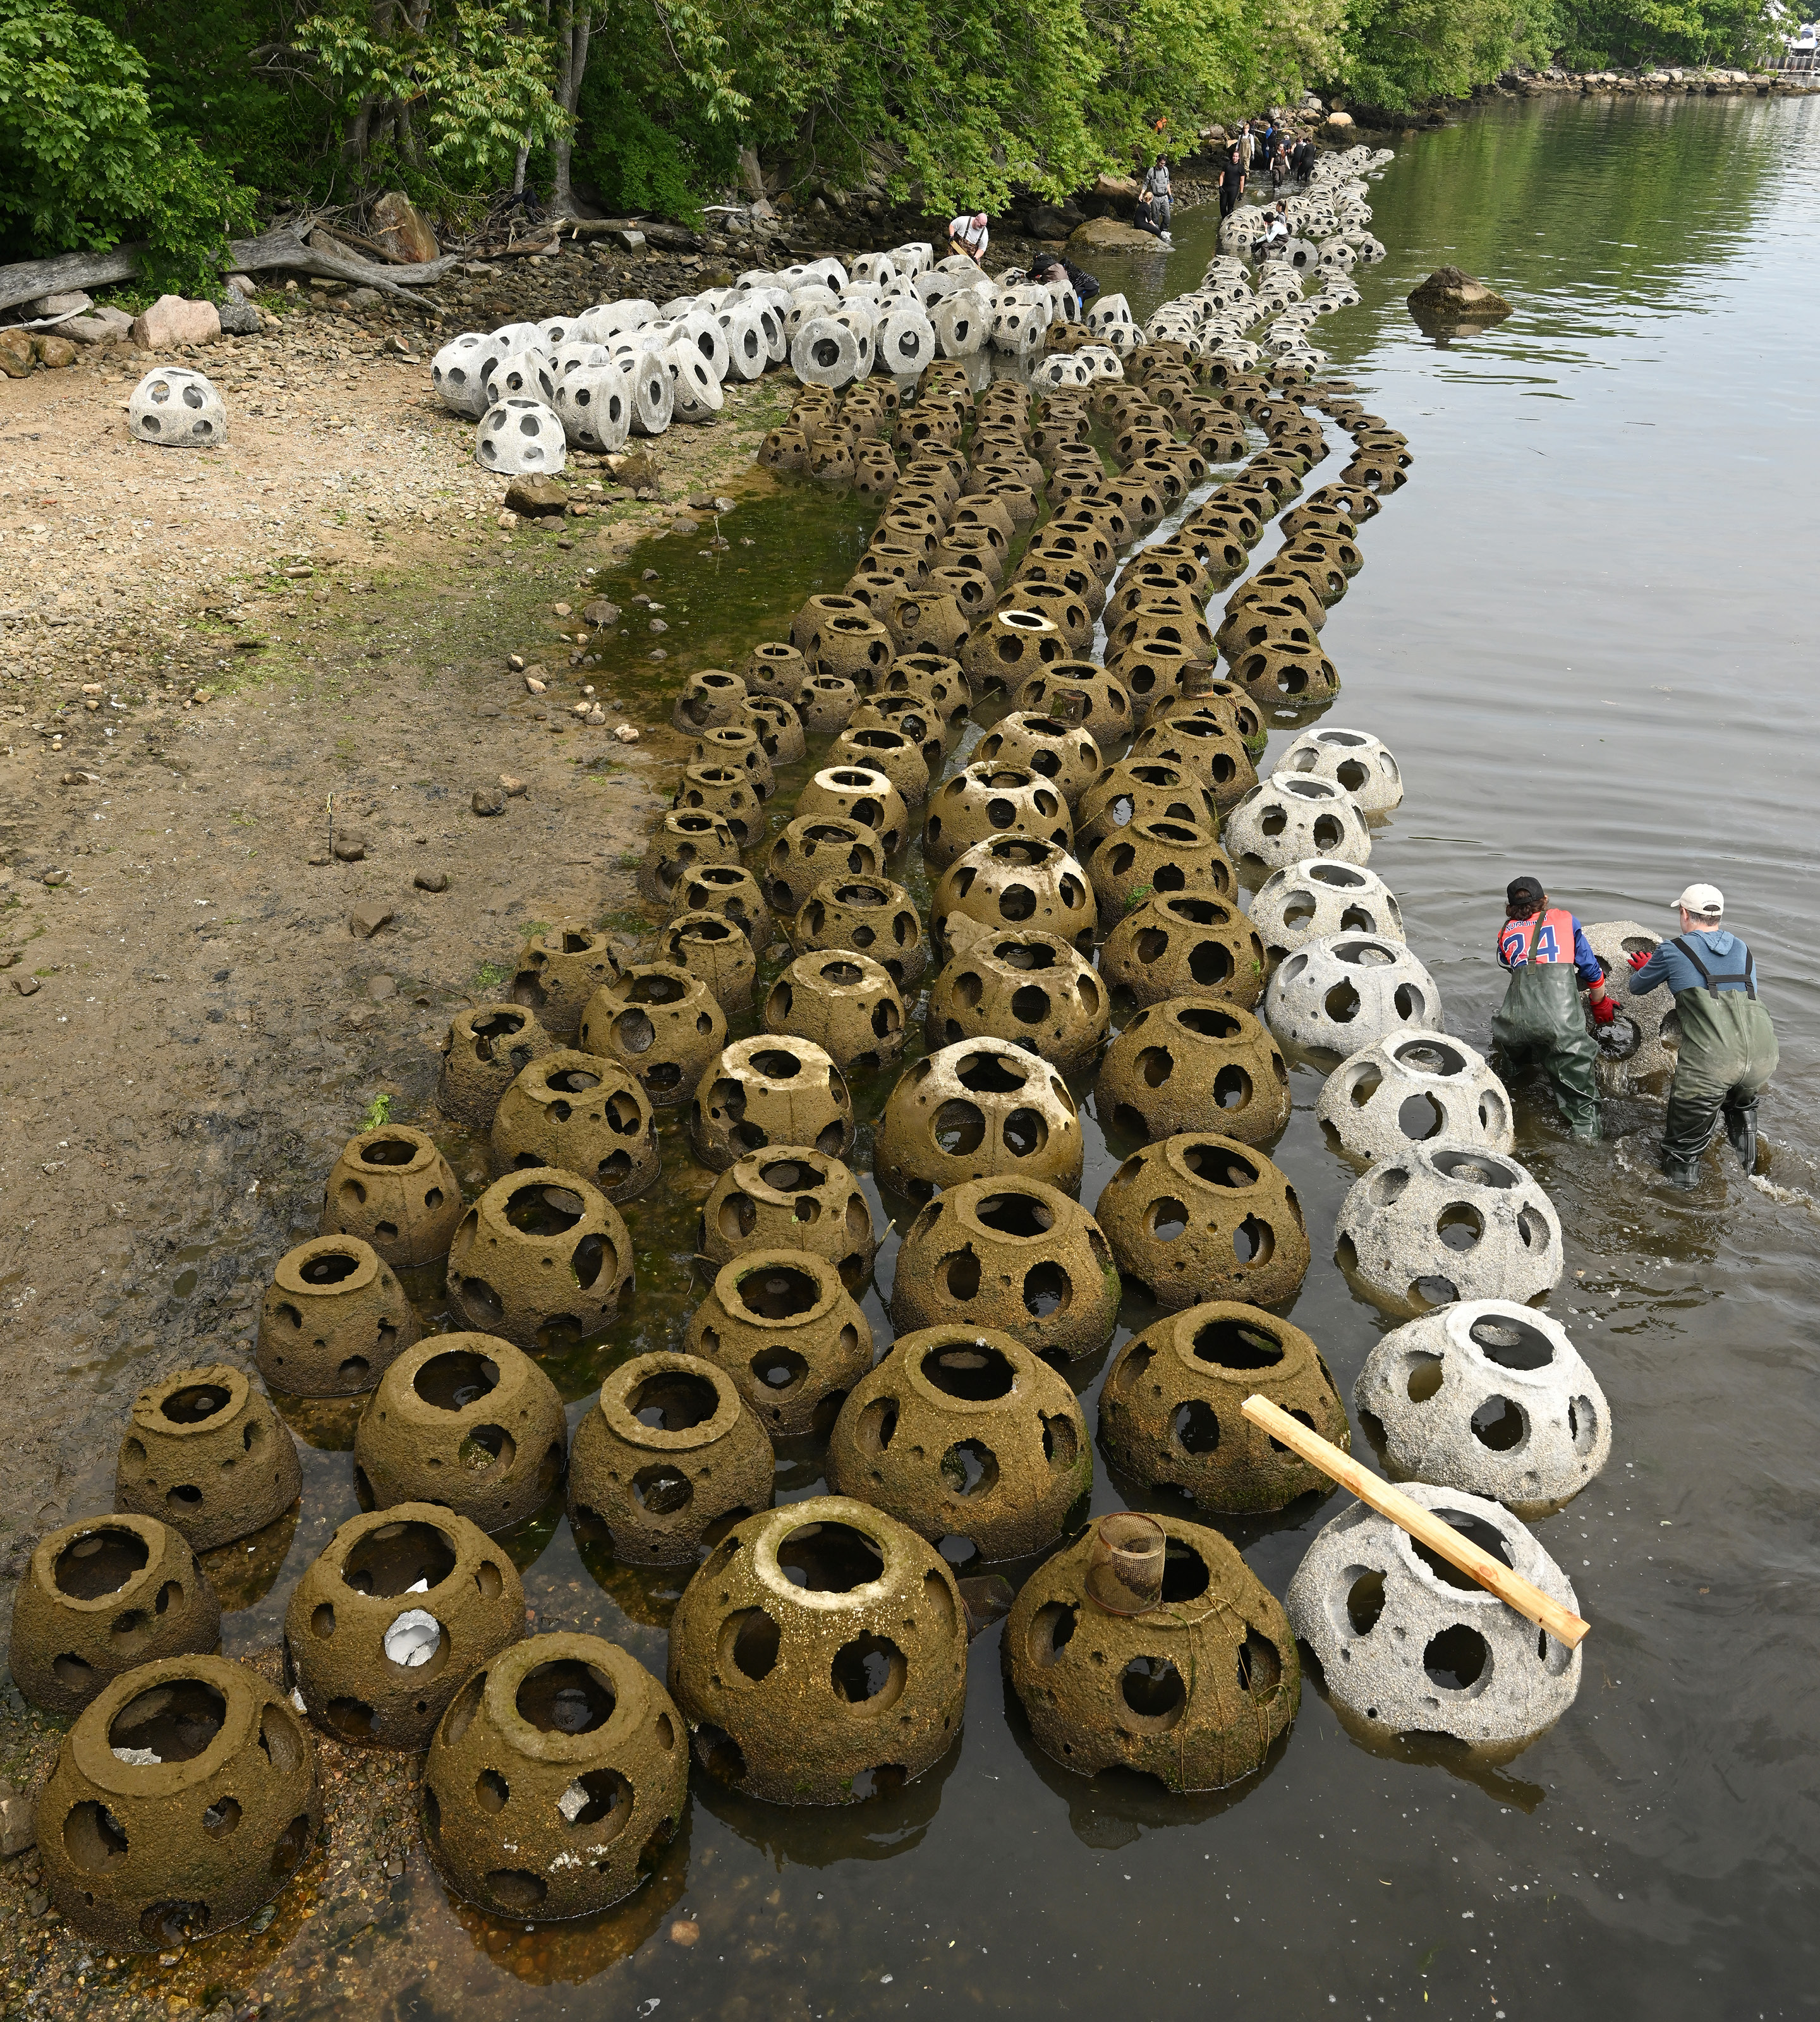 Bird's eye view of hundreds of reef balls ready for installation in the Thames River